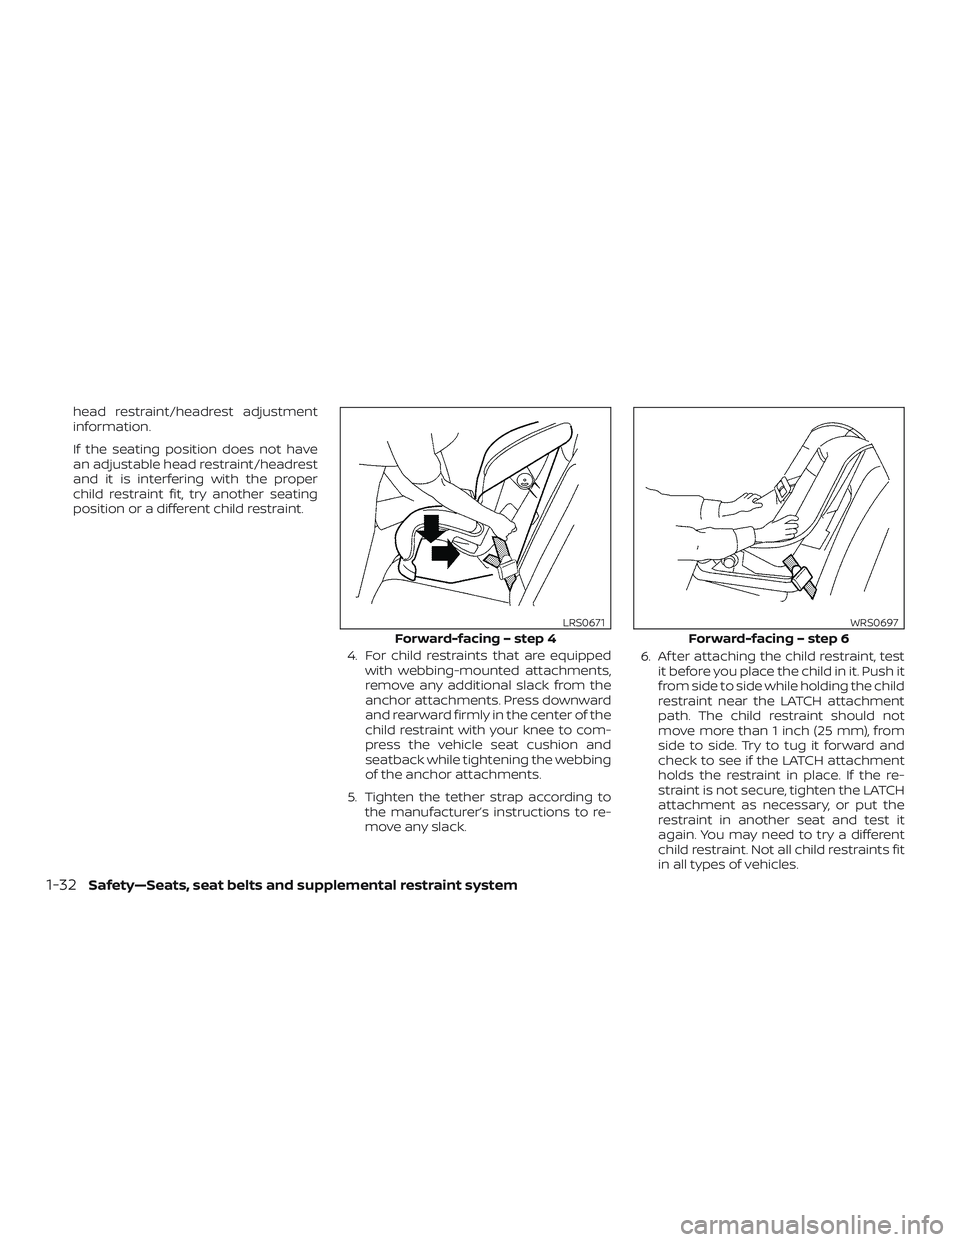 NISSAN LEAF 2018  Owner´s Manual head restraint/headrest adjustment
information.
If the seating position does not have
an adjustable head restraint/headrest
and it is interfering with the proper
child restraint fit, try another seati